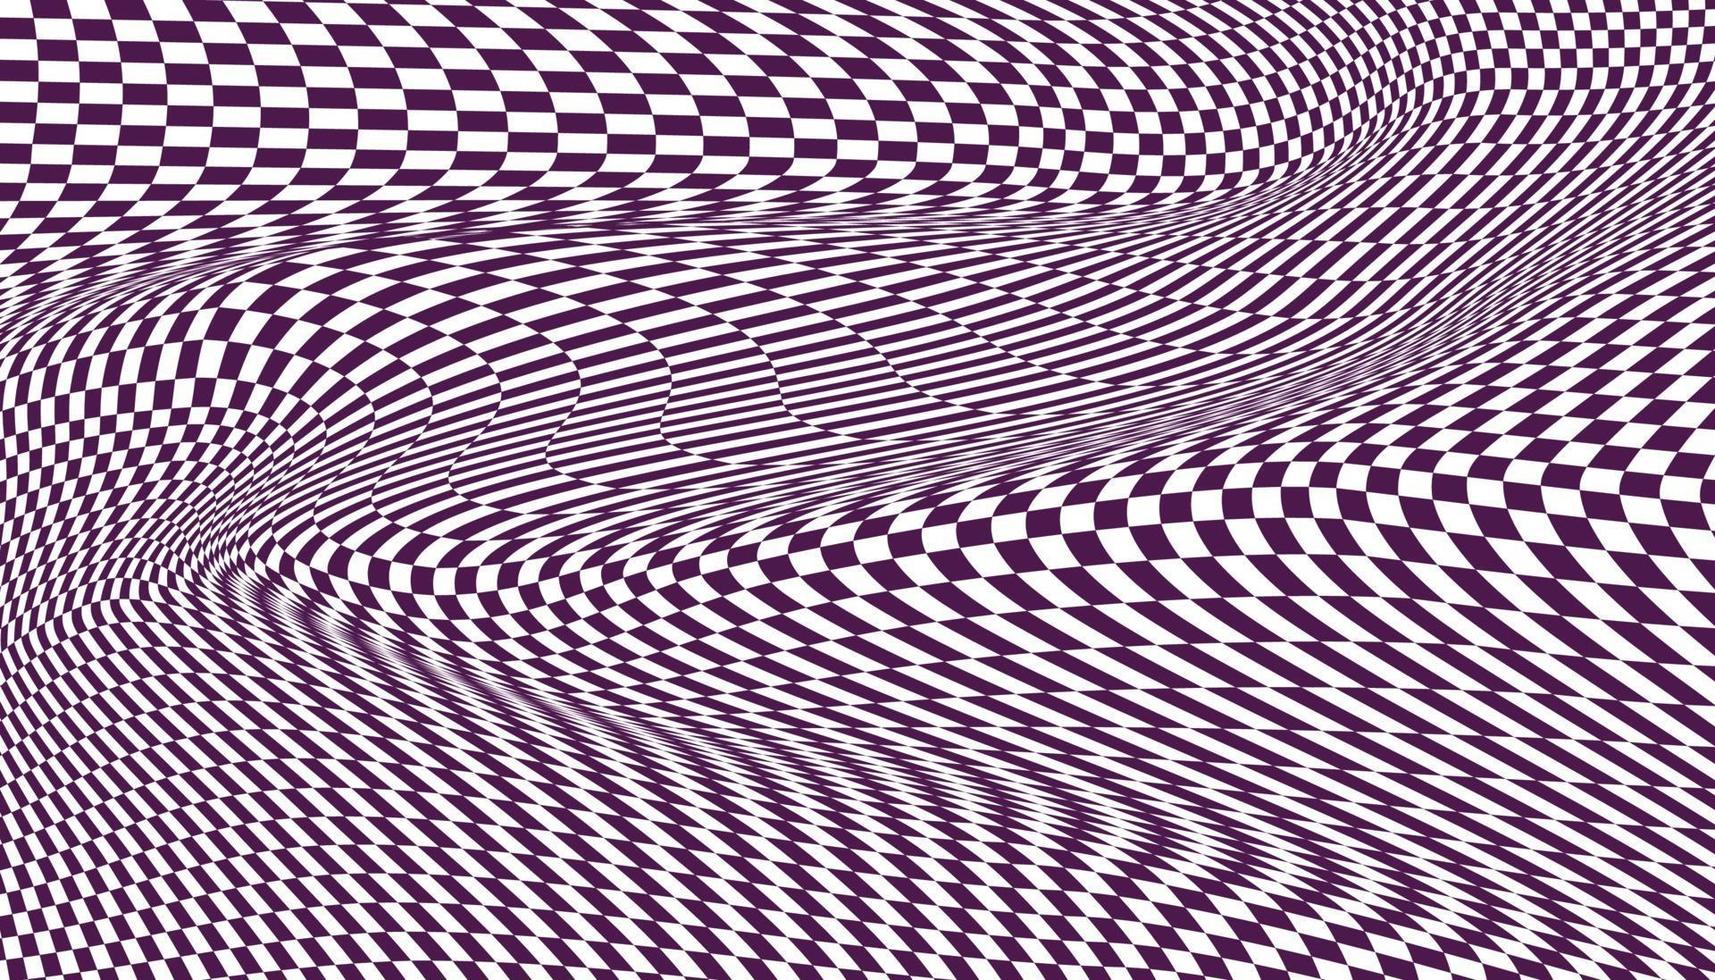 Purple and white distorted checkered background vector